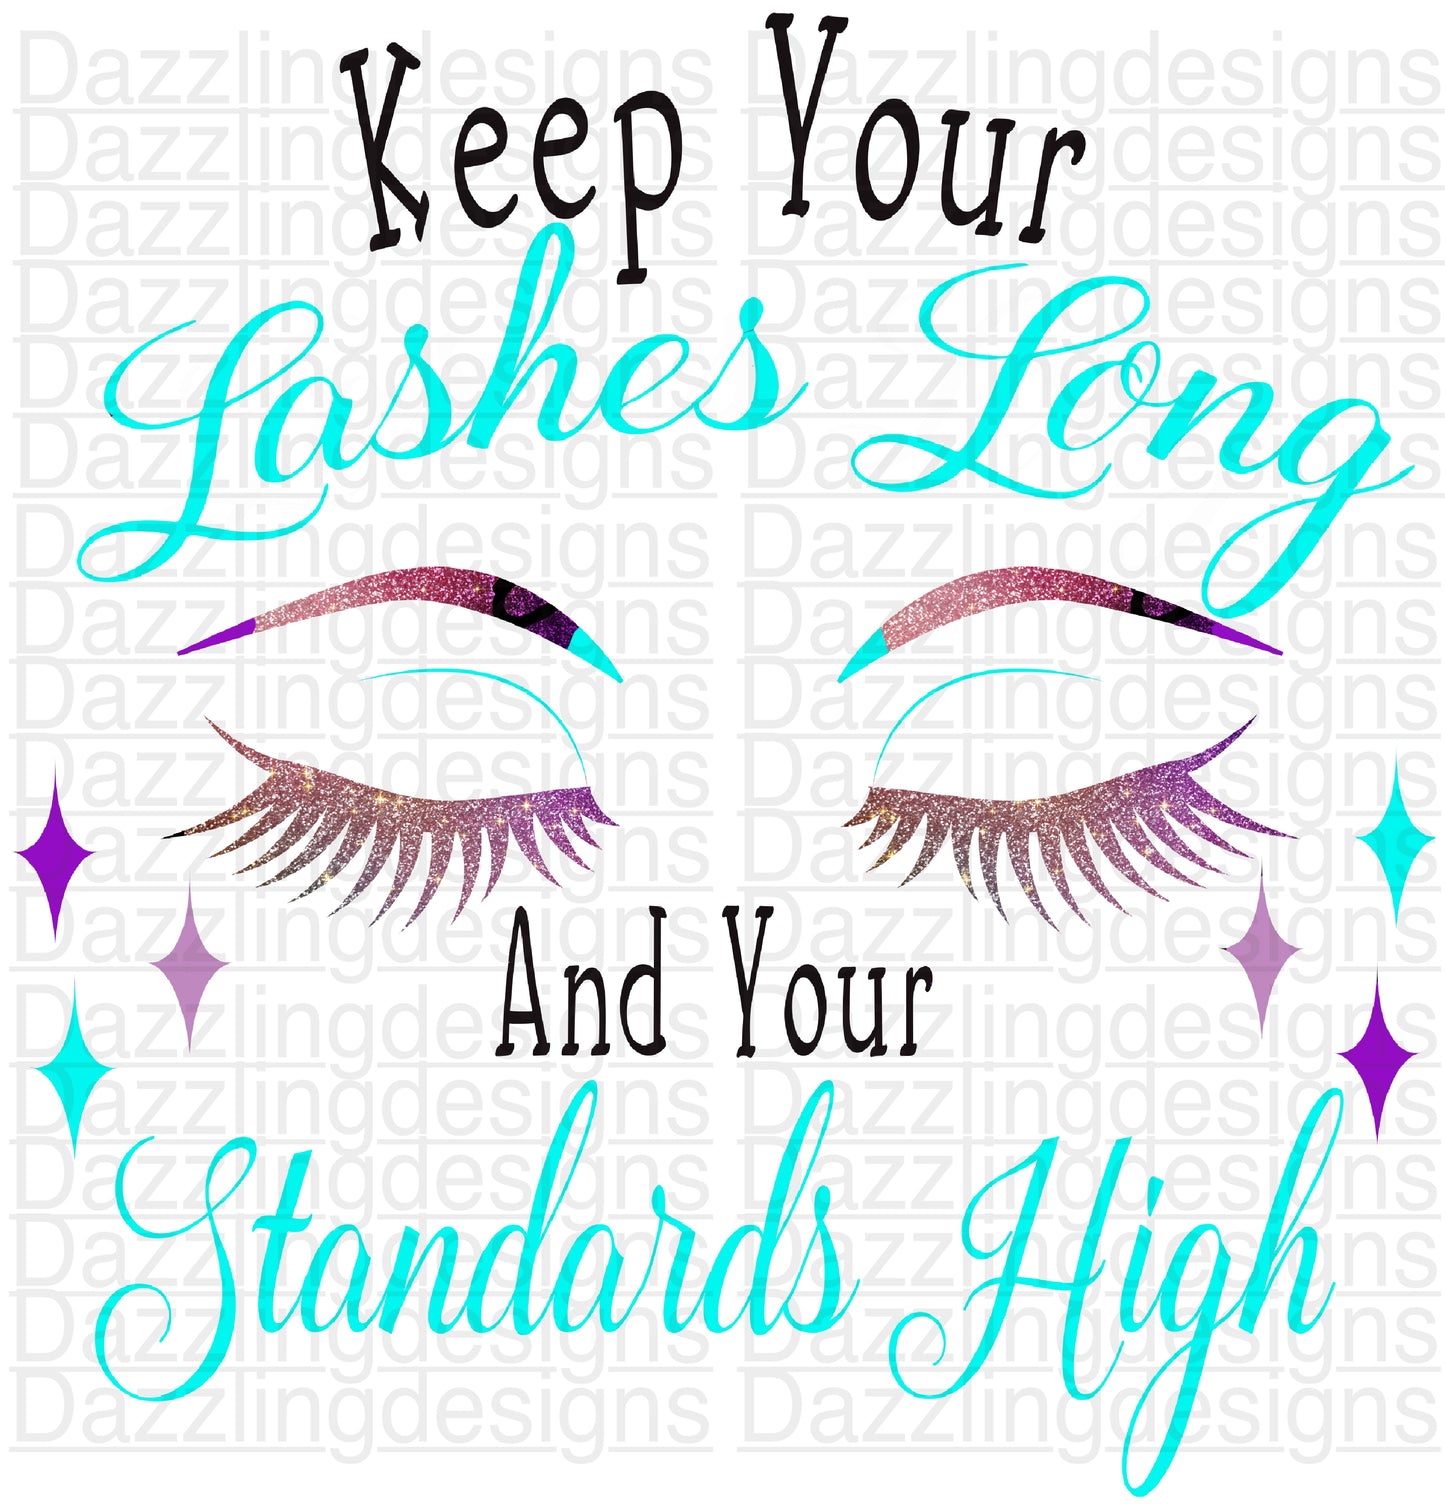 Keep your Lashes Long